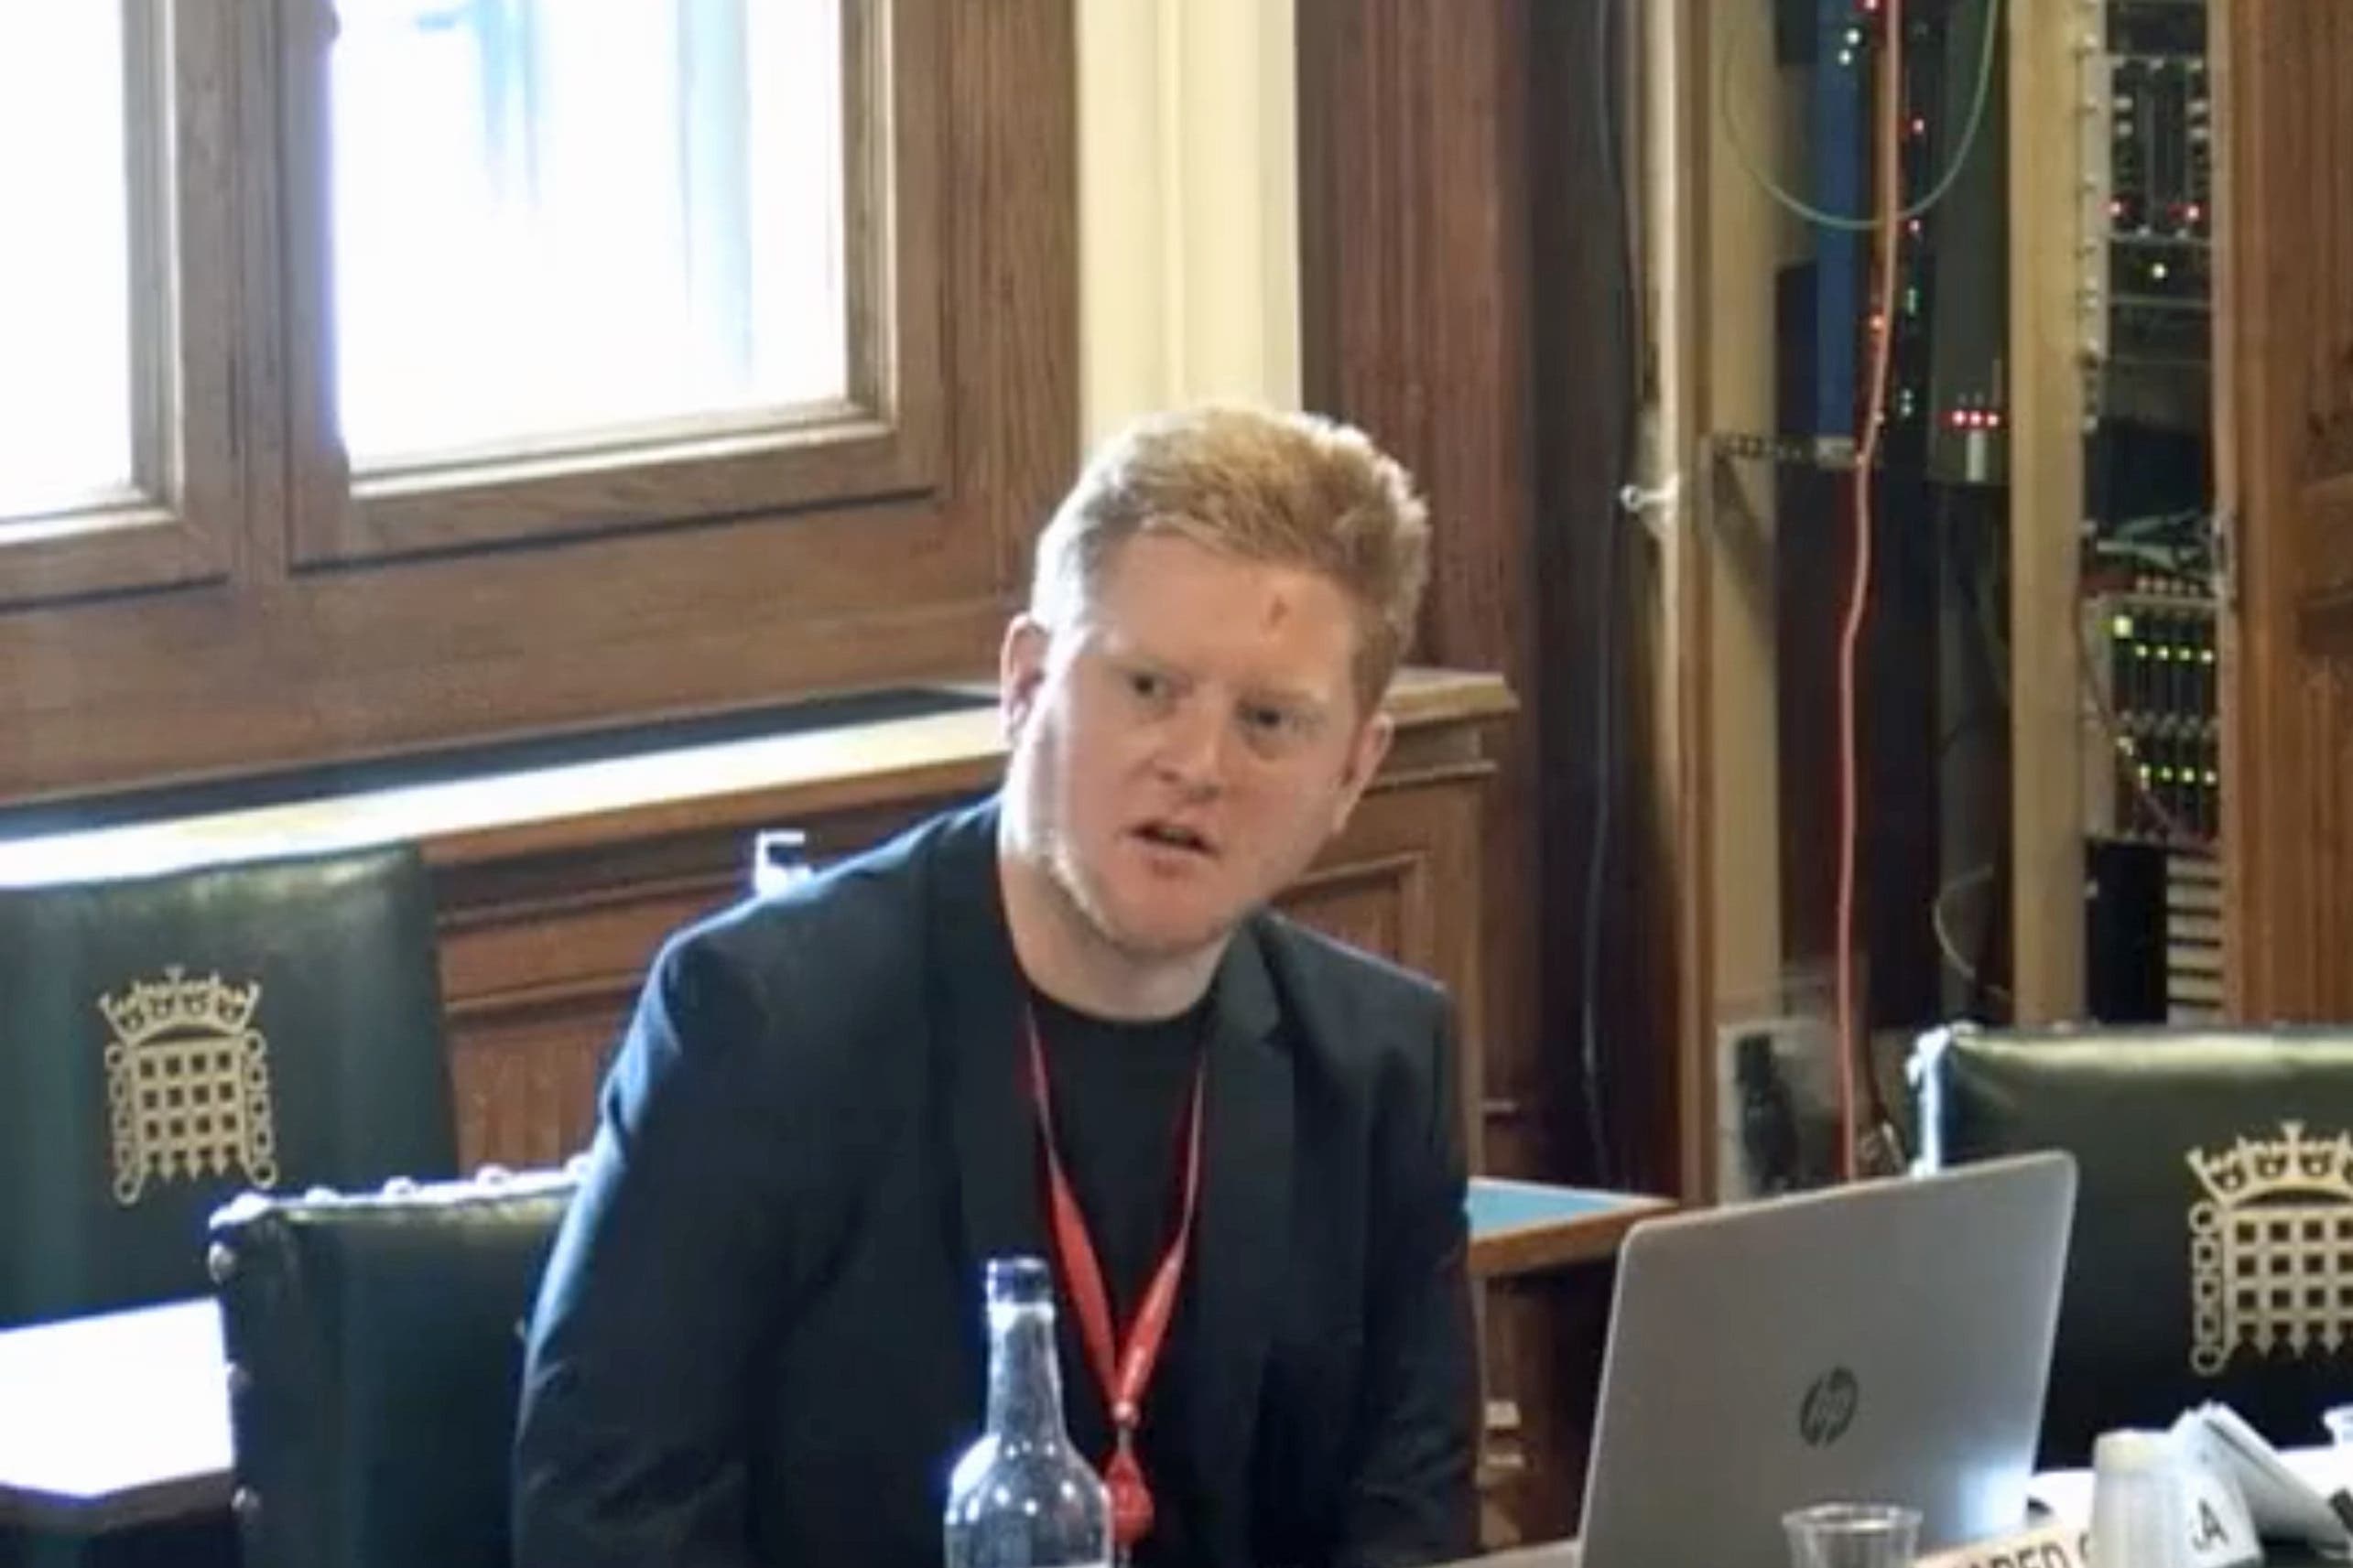 Jared O’Mara is on trial for submitting fake invoices